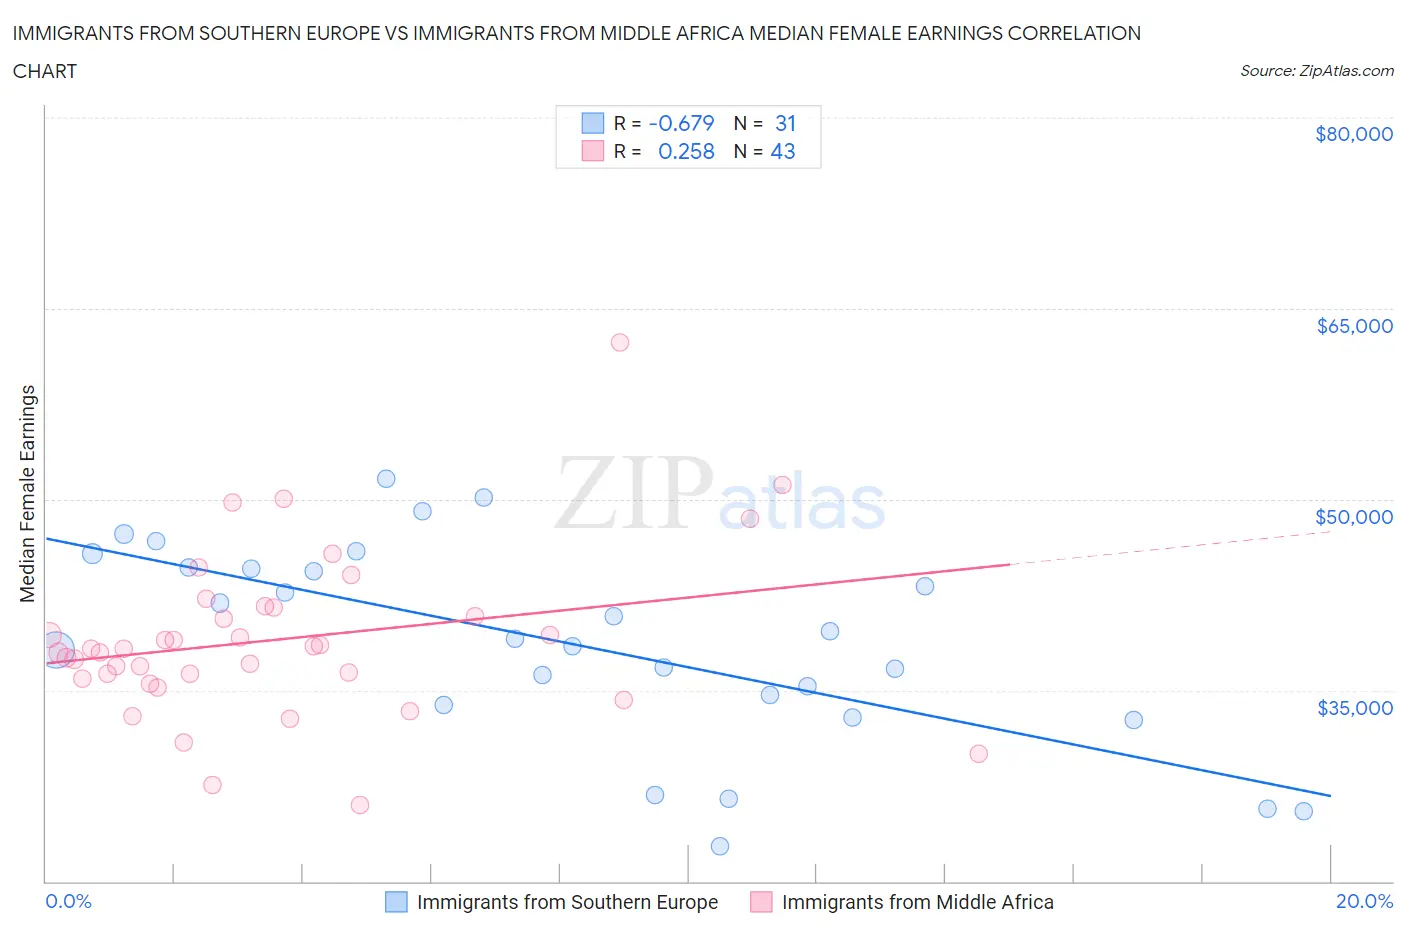 Immigrants from Southern Europe vs Immigrants from Middle Africa Median Female Earnings